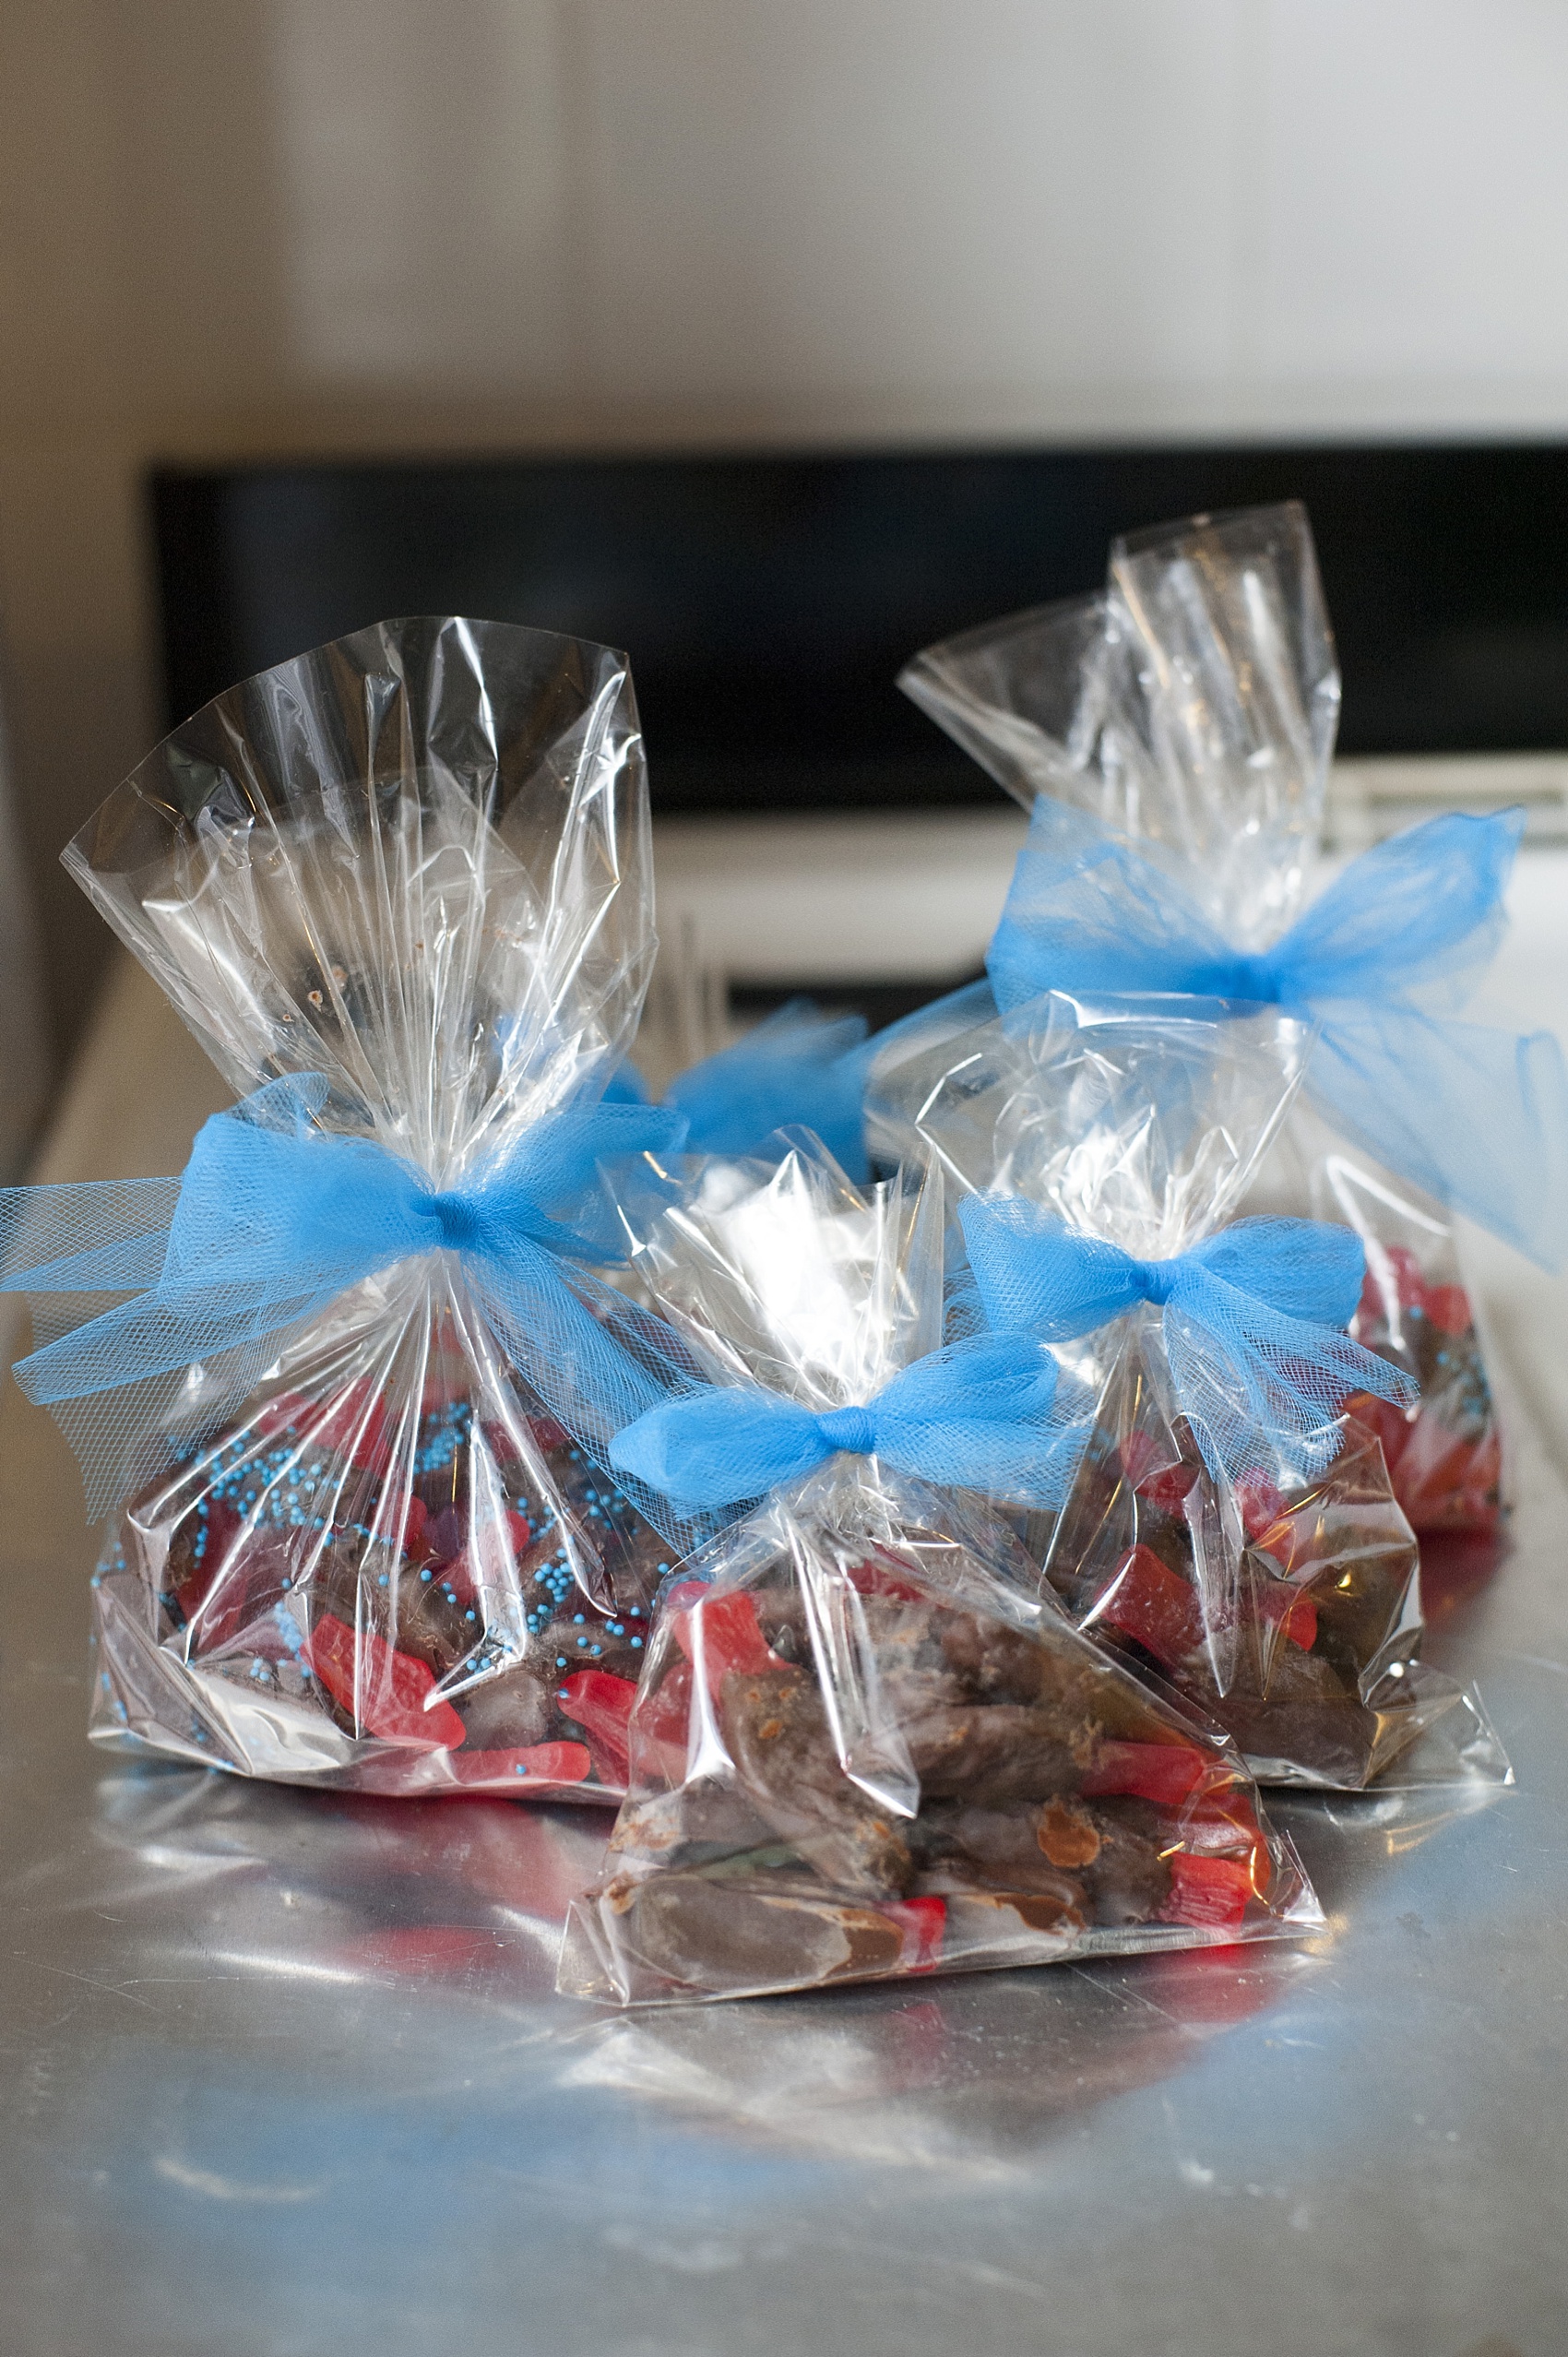 Chocolate Covered Swedish Fish! DIY candy and photos by Mikkel Paige Photography. #swedishfish #chocolatecovered #candy